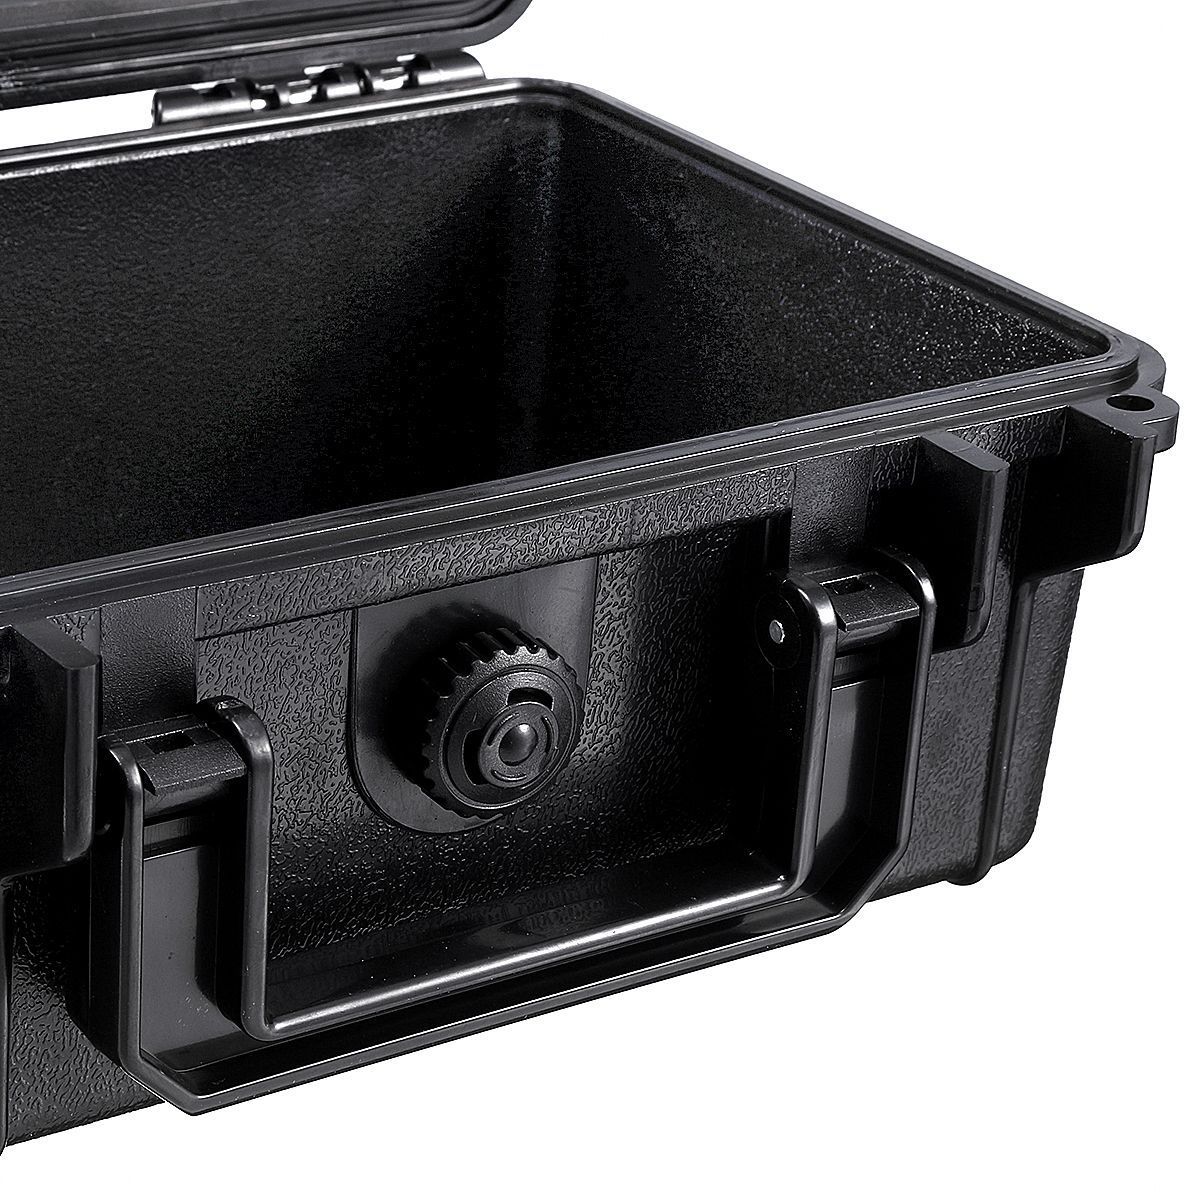 210x165x85mm-Waterproof-Hard-Carry-Camera-Lens-Photography-Tool-Case-Bag-Storage-Box-with-Sponge-1351189